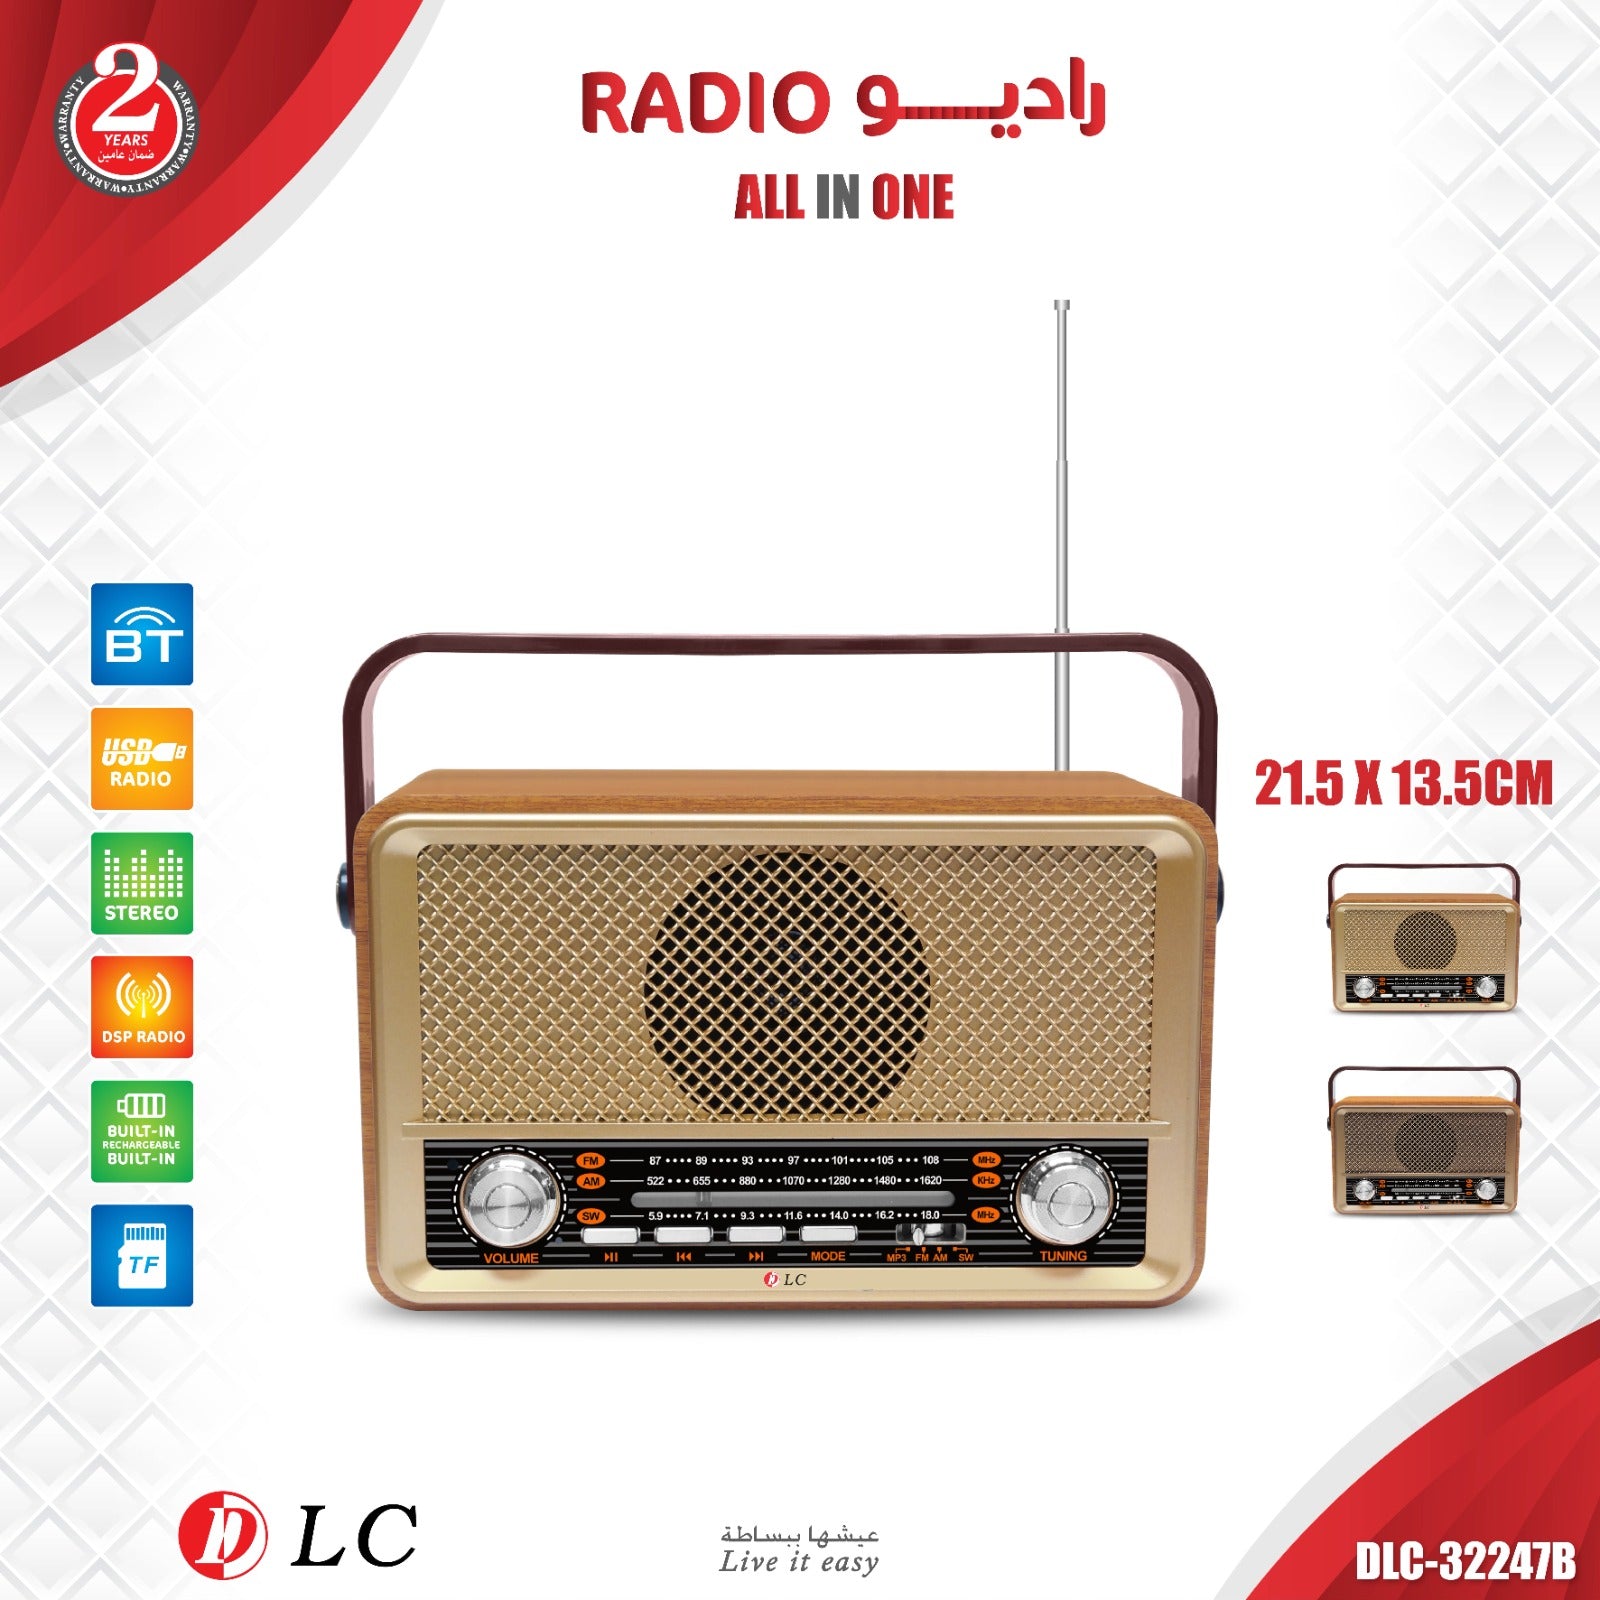 RADIO ALL IN 1 FROM DLC #32247B